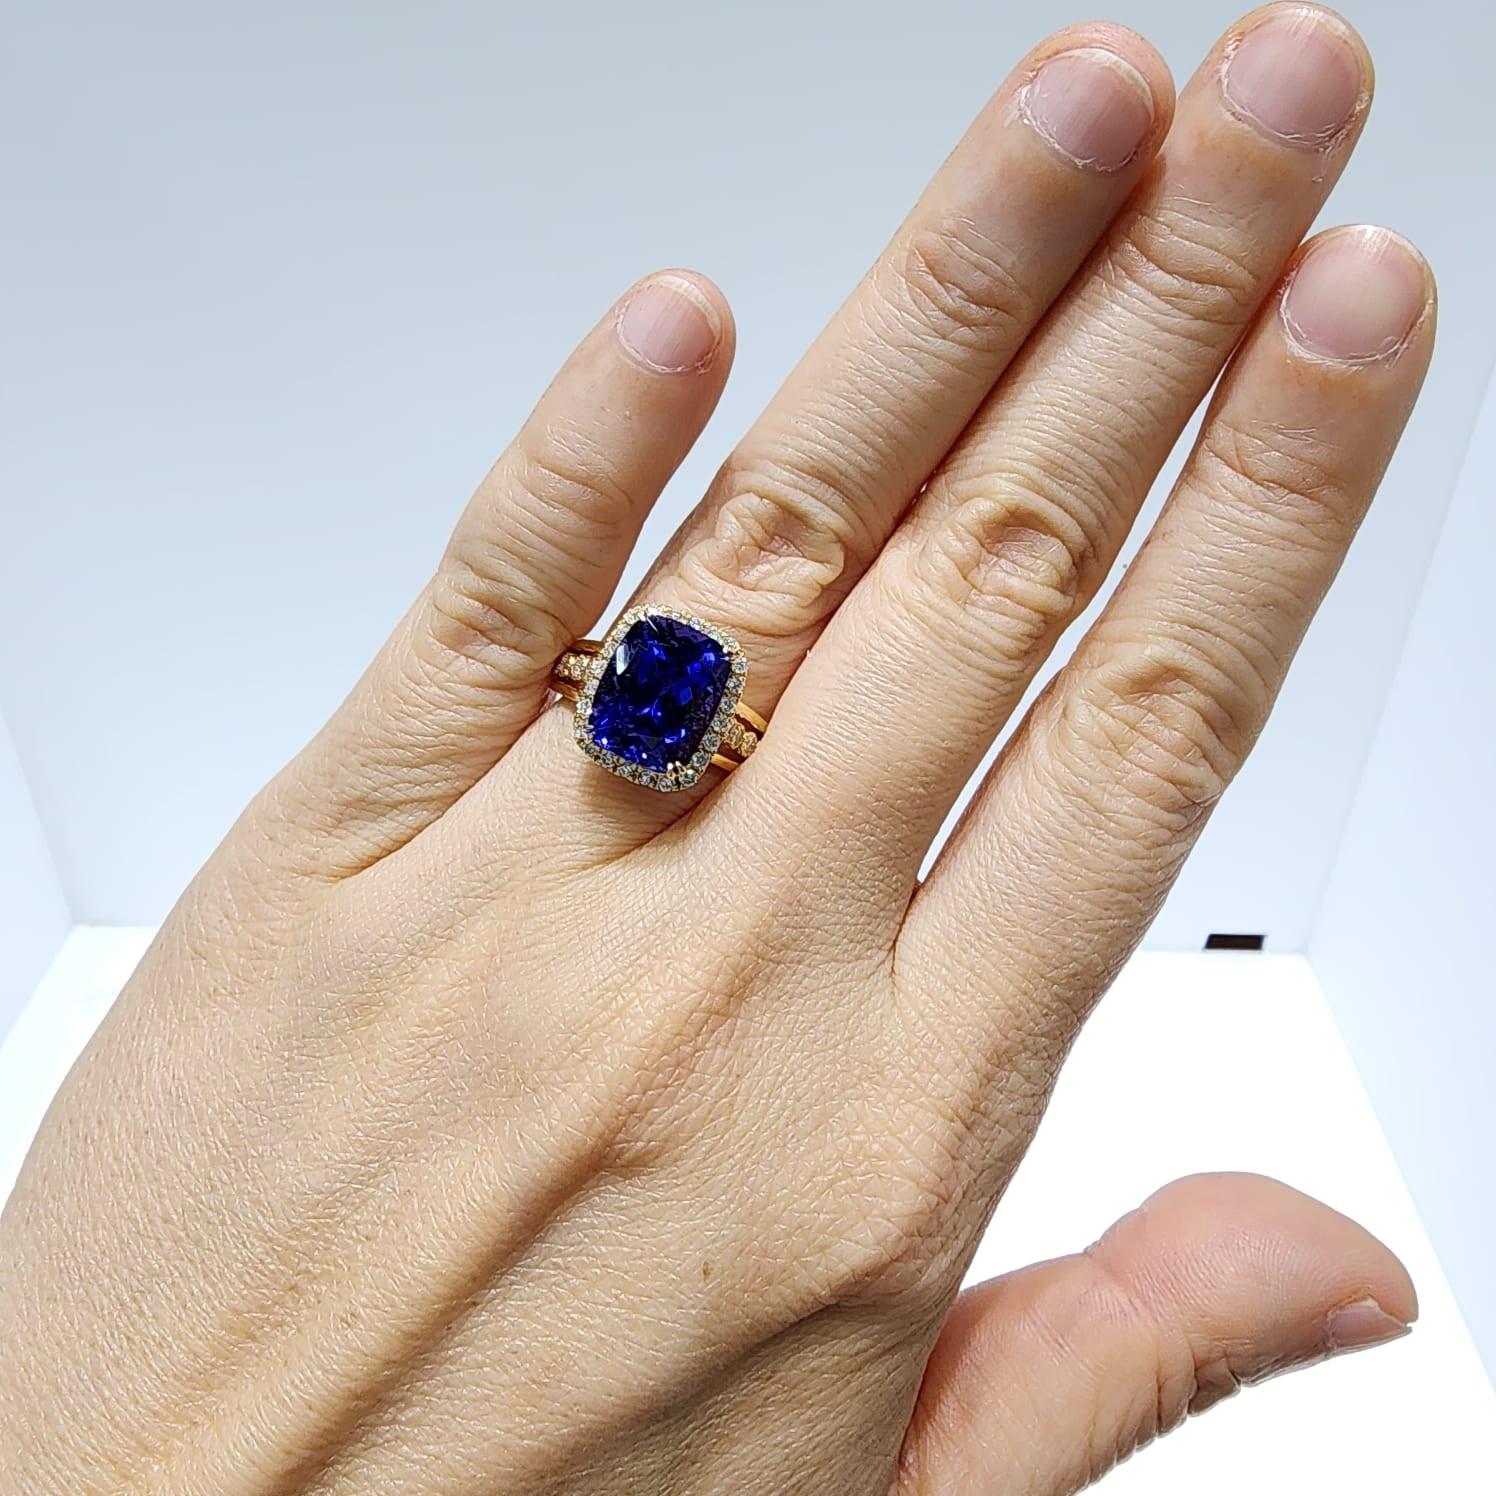 Contemporary IGI Certified 5.31 Carat Tanzanite Diamond Cocktail Ring in 18K Yellow Gold For Sale